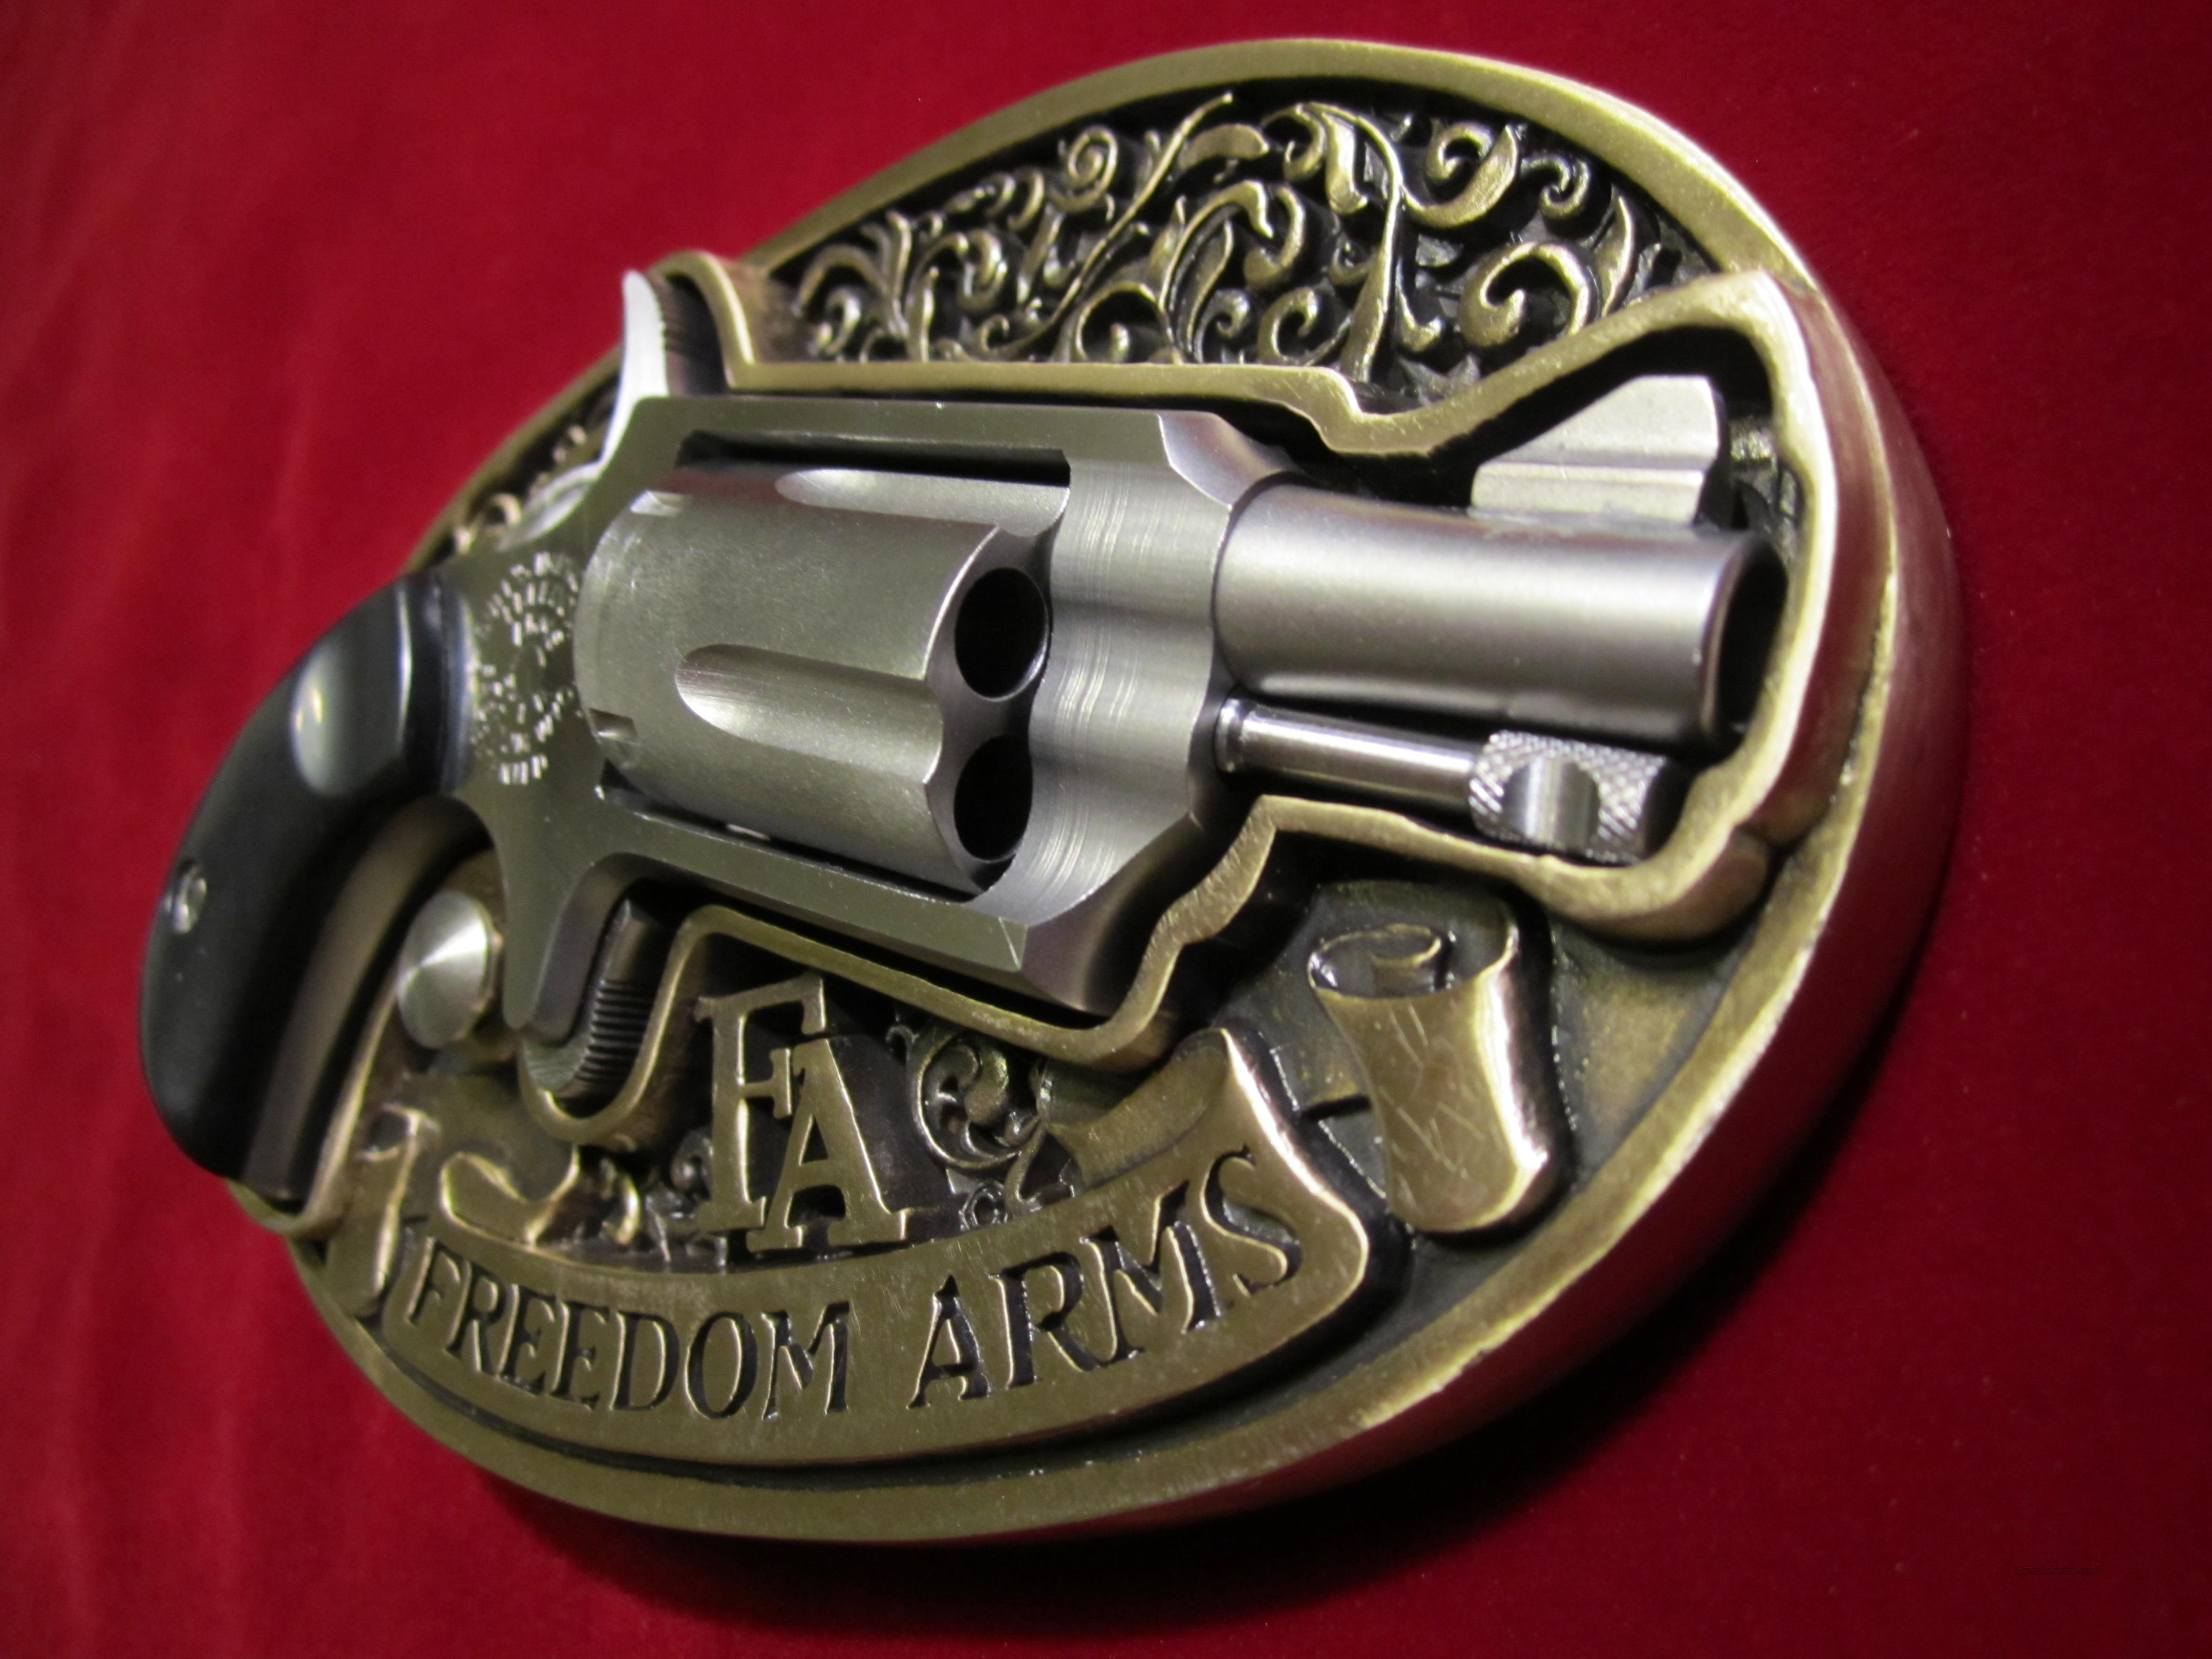 Freedom Arms .22LR Mini Belt Buckle Revolver for sale